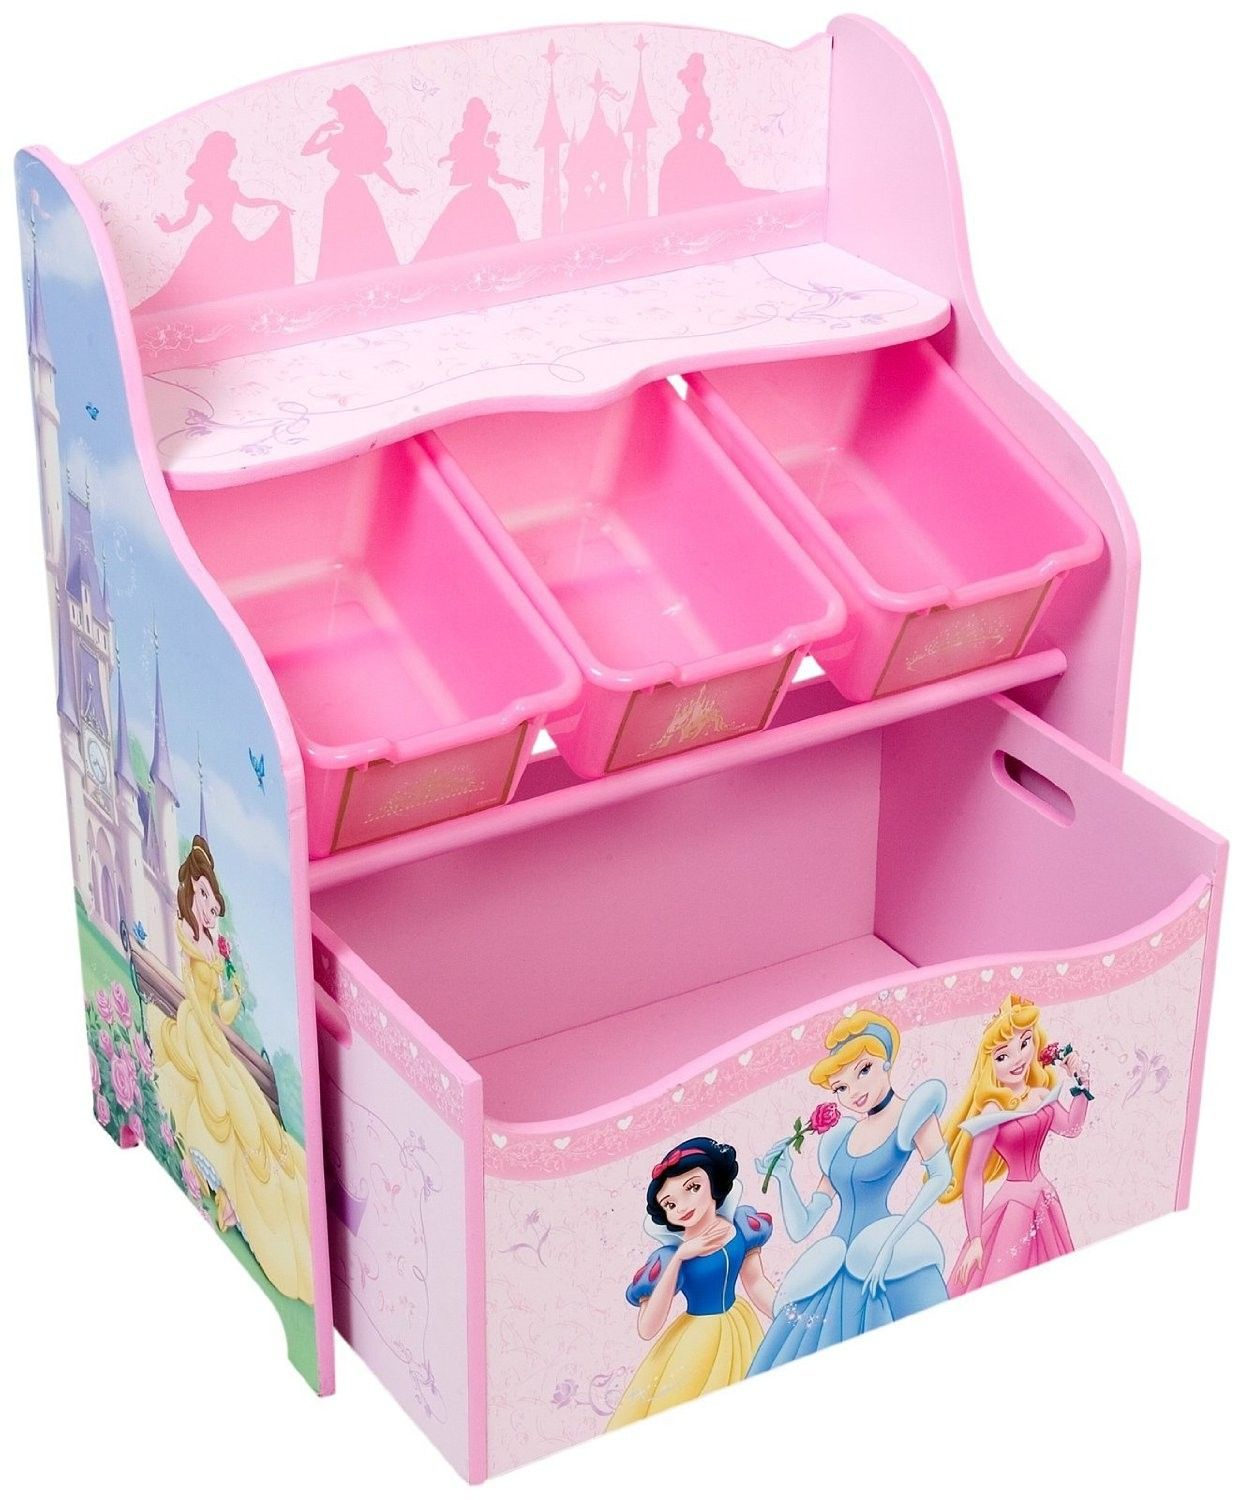 Pin Tnsdeals On Toy And Toy Organiser In 2019 Disney Princess within dimensions 1240 X 1500